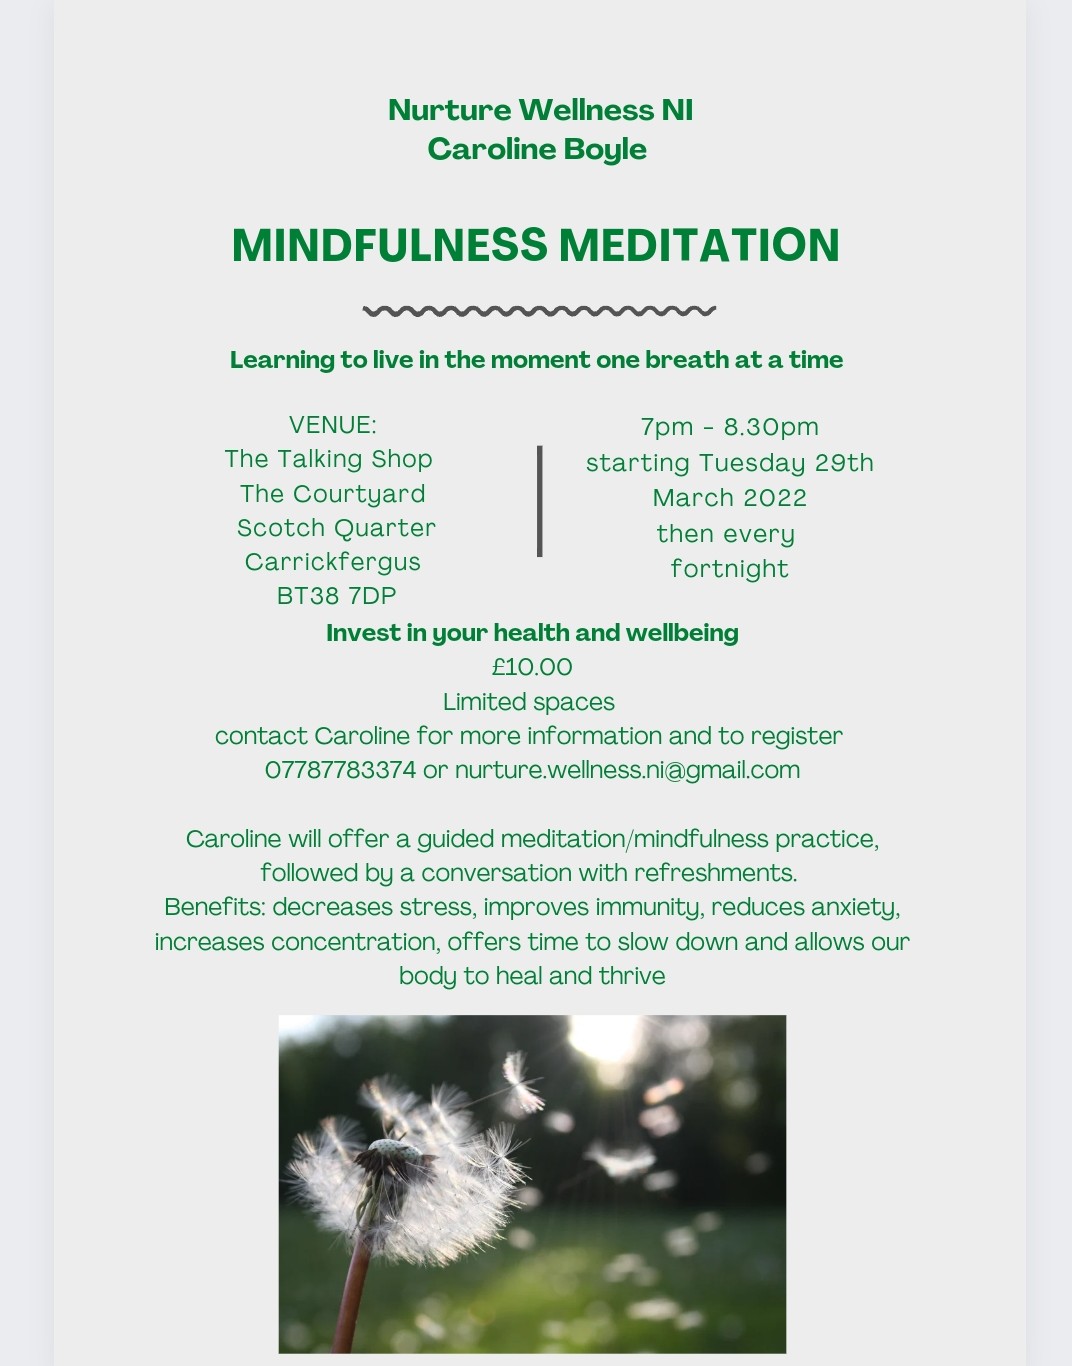 A flyer for Mindfulness Meditation sessions at the Talking Shop